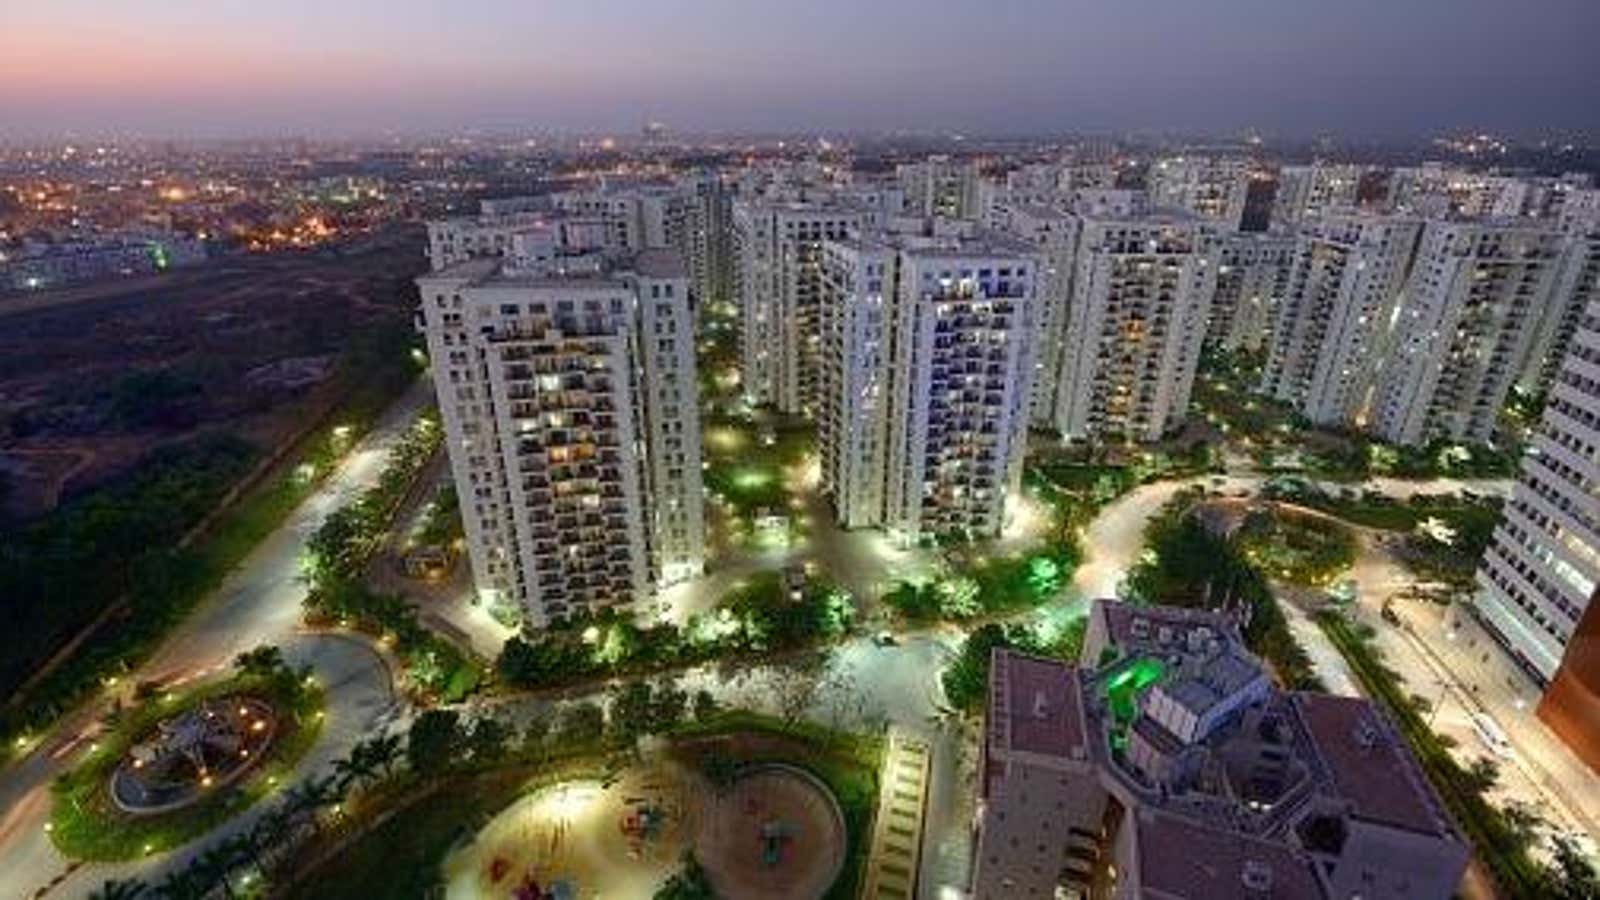 Sky-high rents make Bengaluru India's hottest residential market